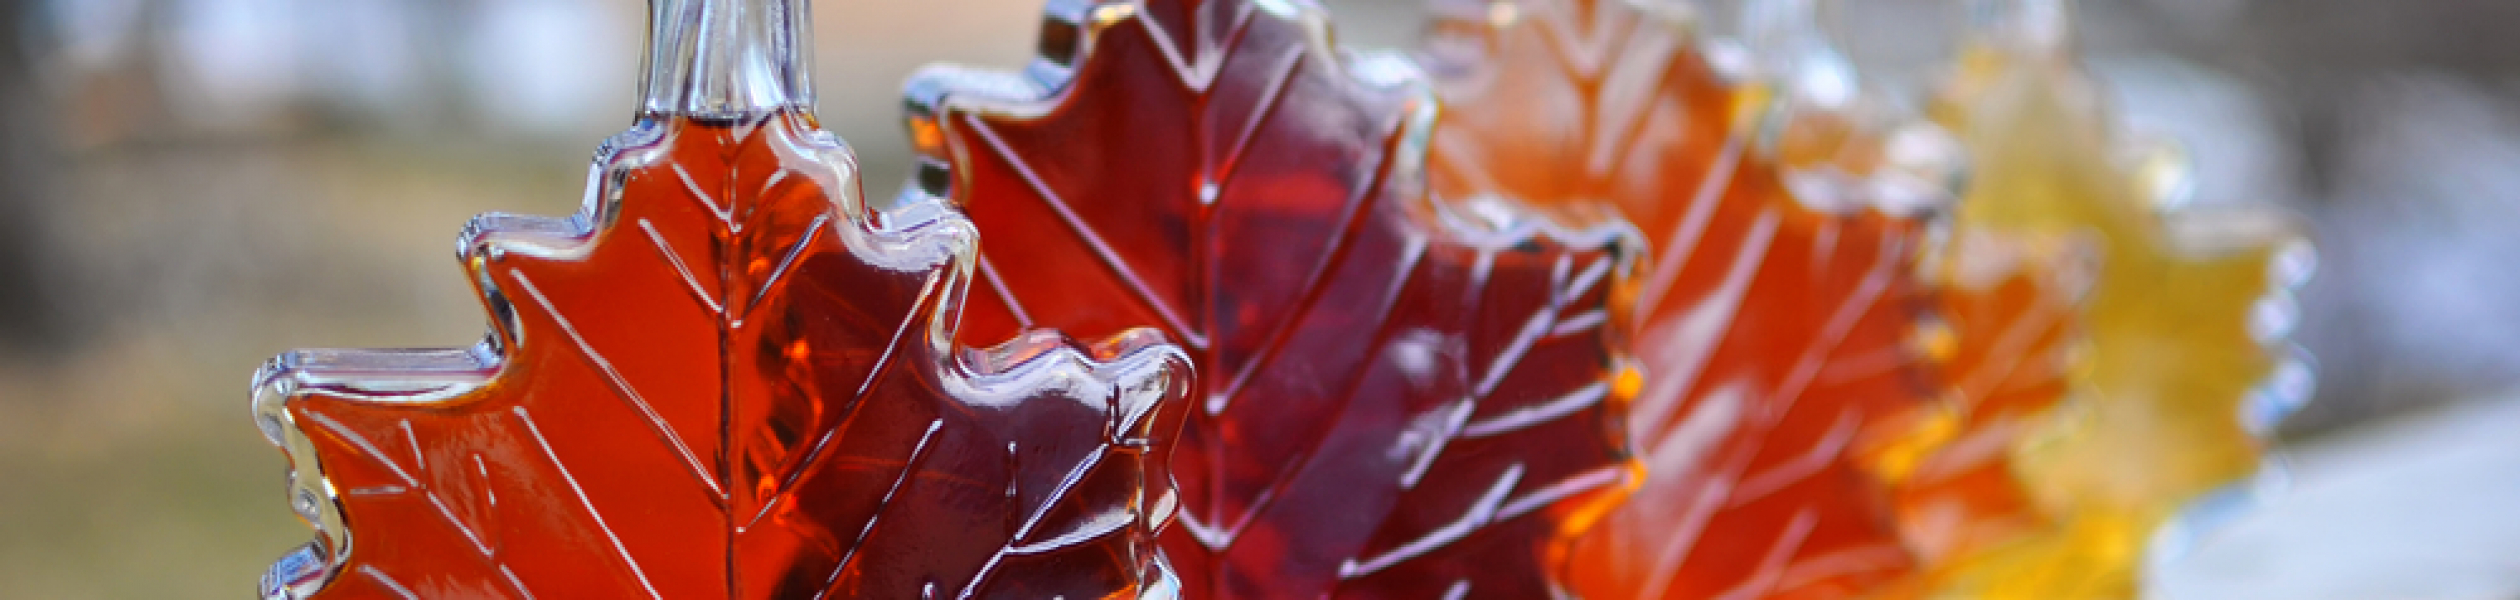 Best Maple Syrup Festivals in Ontario Logel's Auto Parts